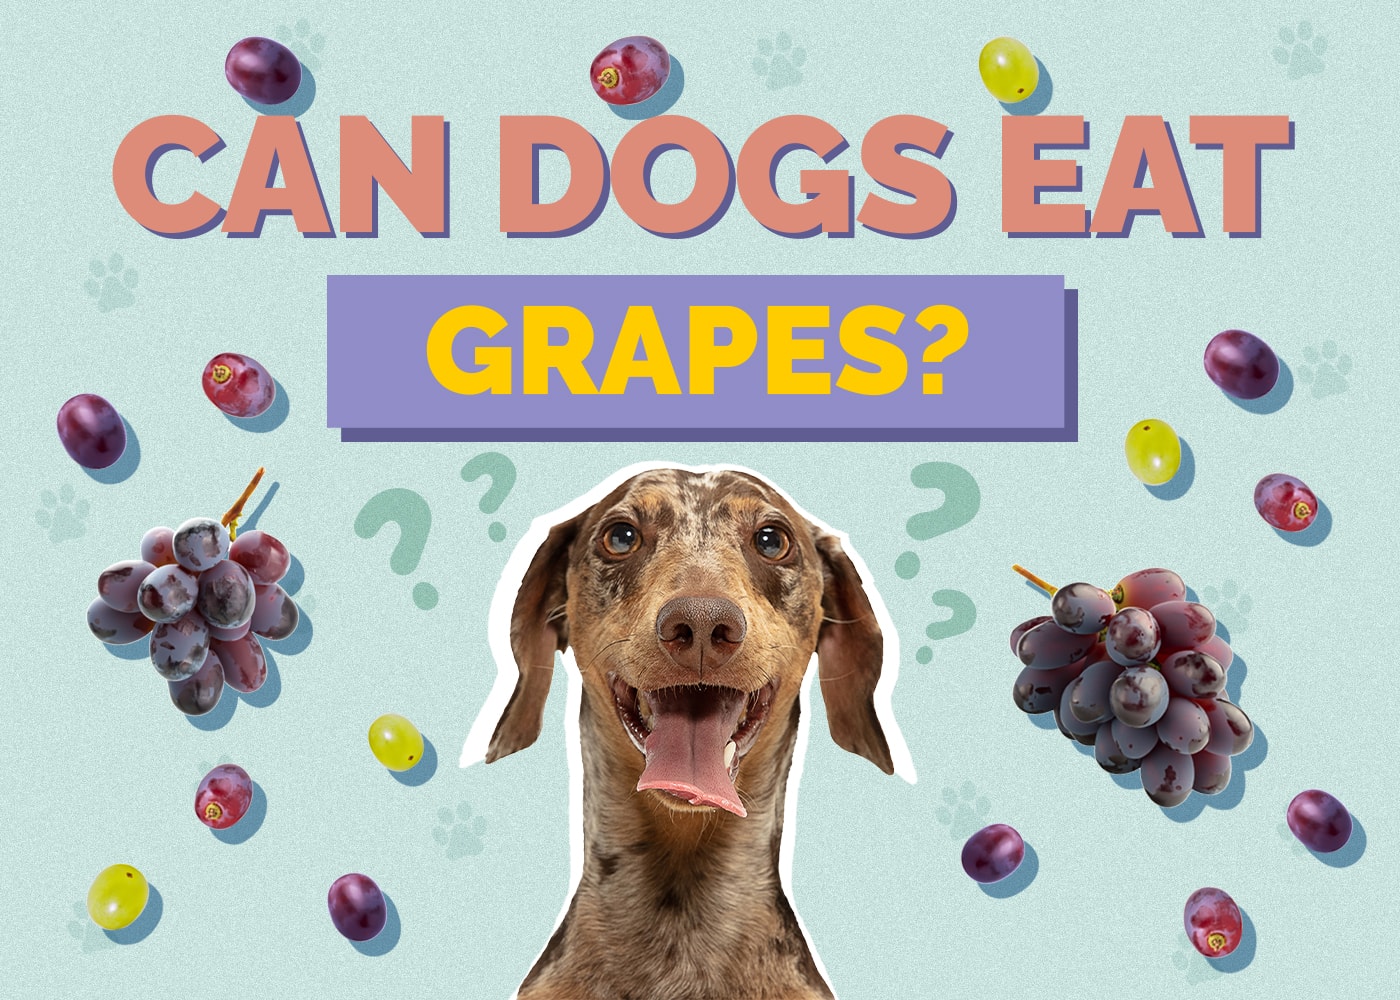 Can Dogs Eat grapes